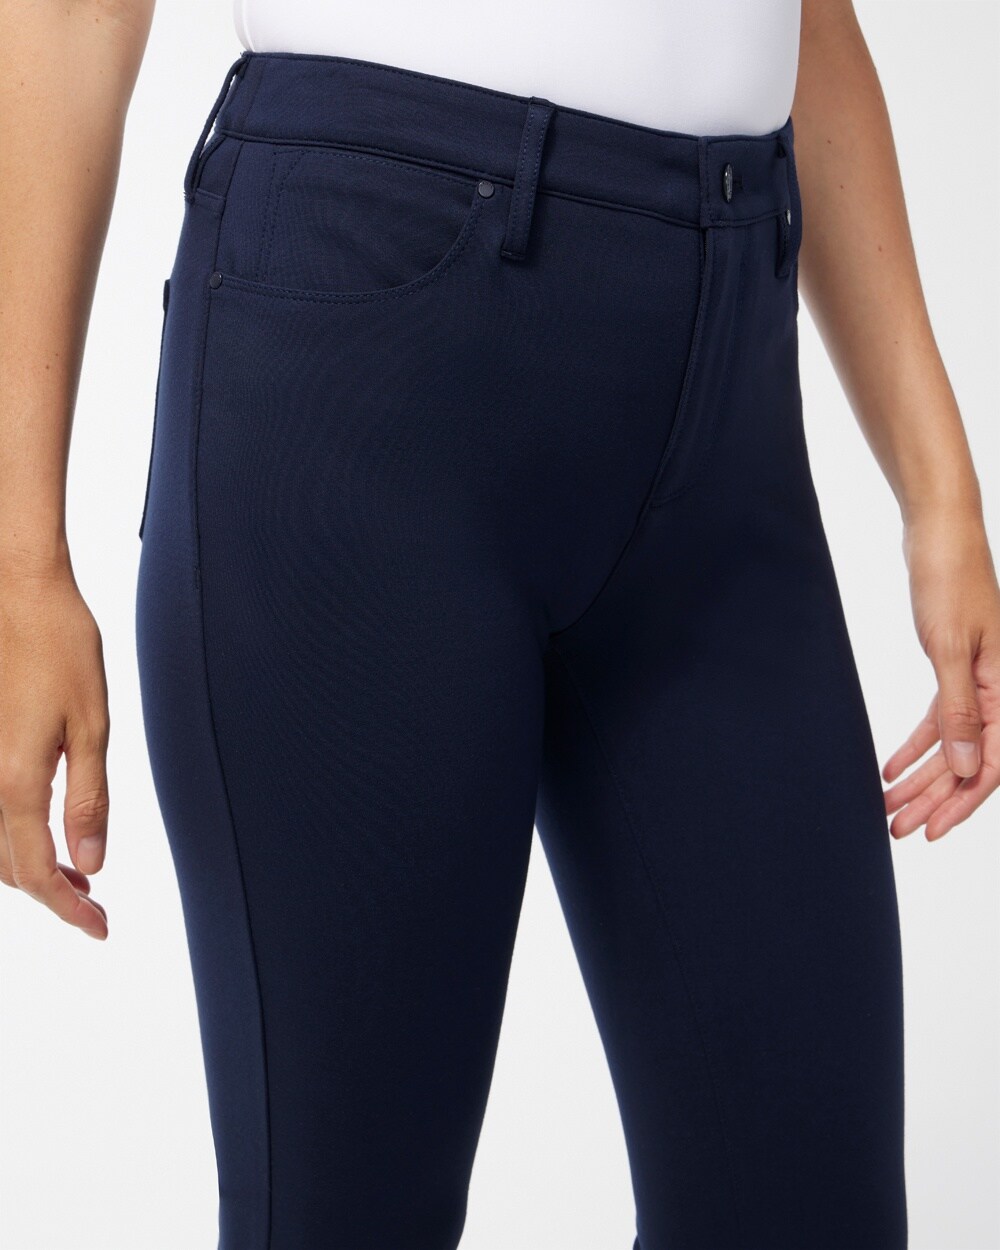 Fabulously Slimming 5-Pocket Ponte Ankle Pants - Chico's Off The Rack -  Chico's Outlet